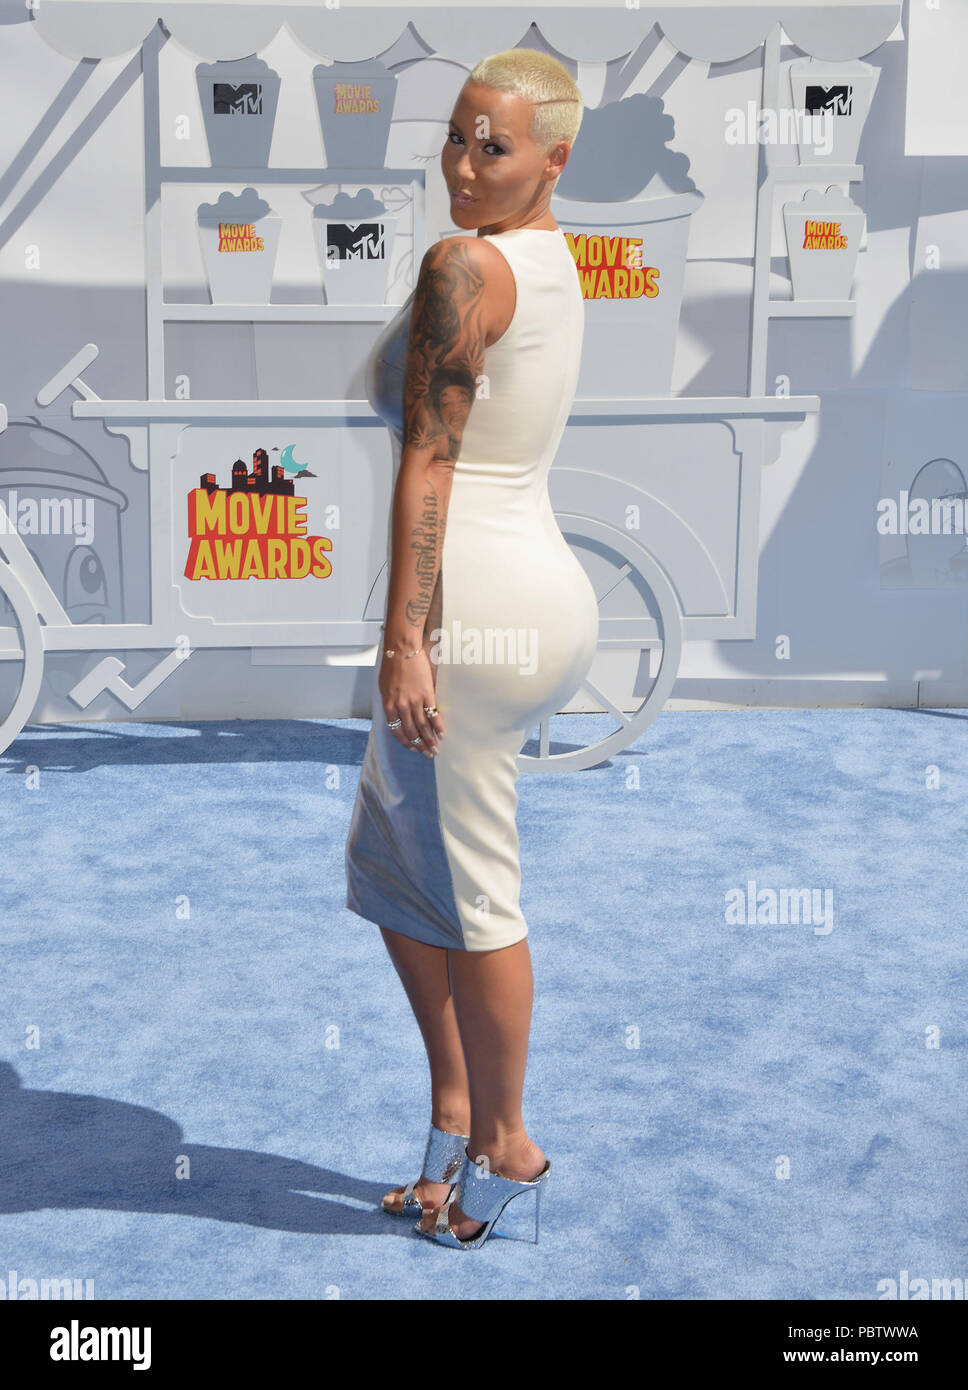 Amber rose best pictures